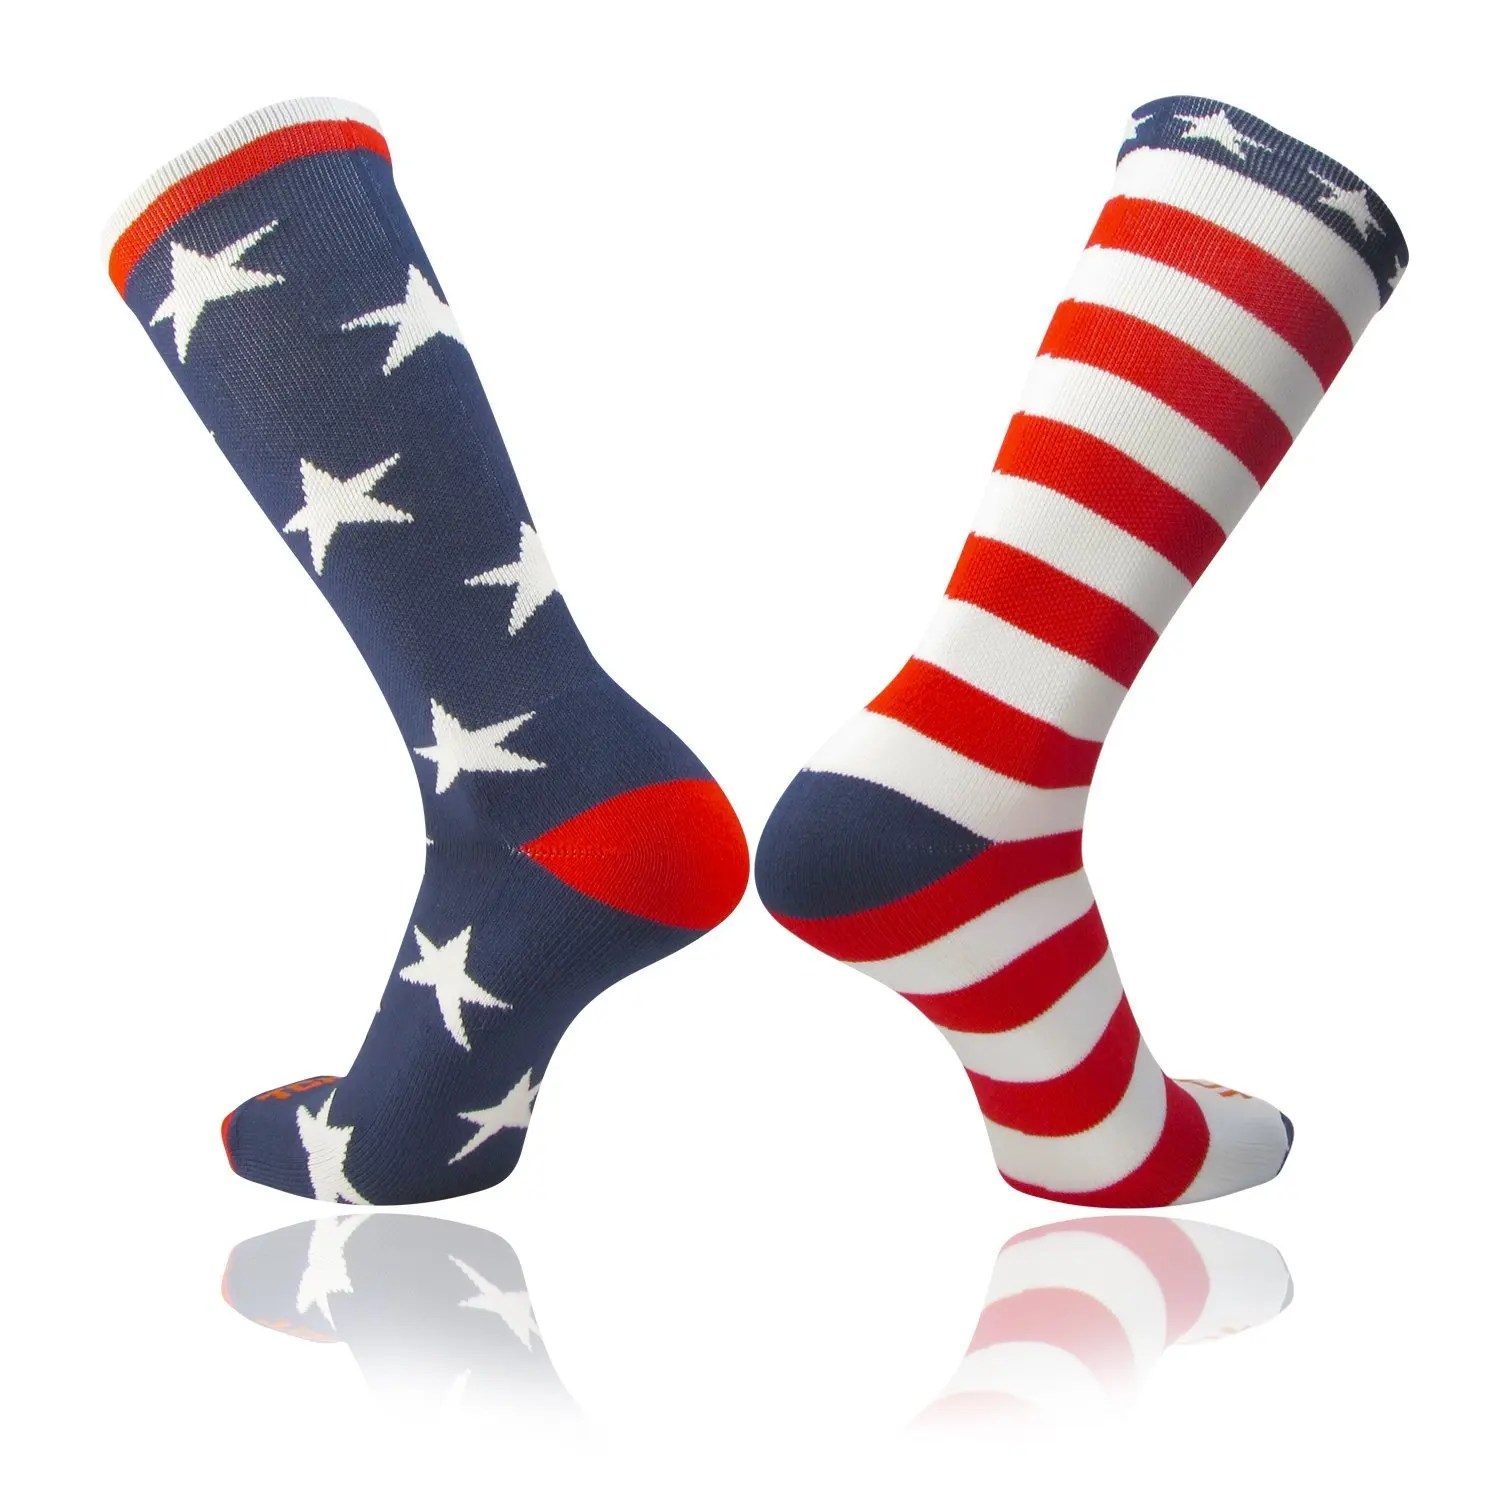 Cheap Baseball Socks With Stripes Find Baseball Socks With Stripes 0722